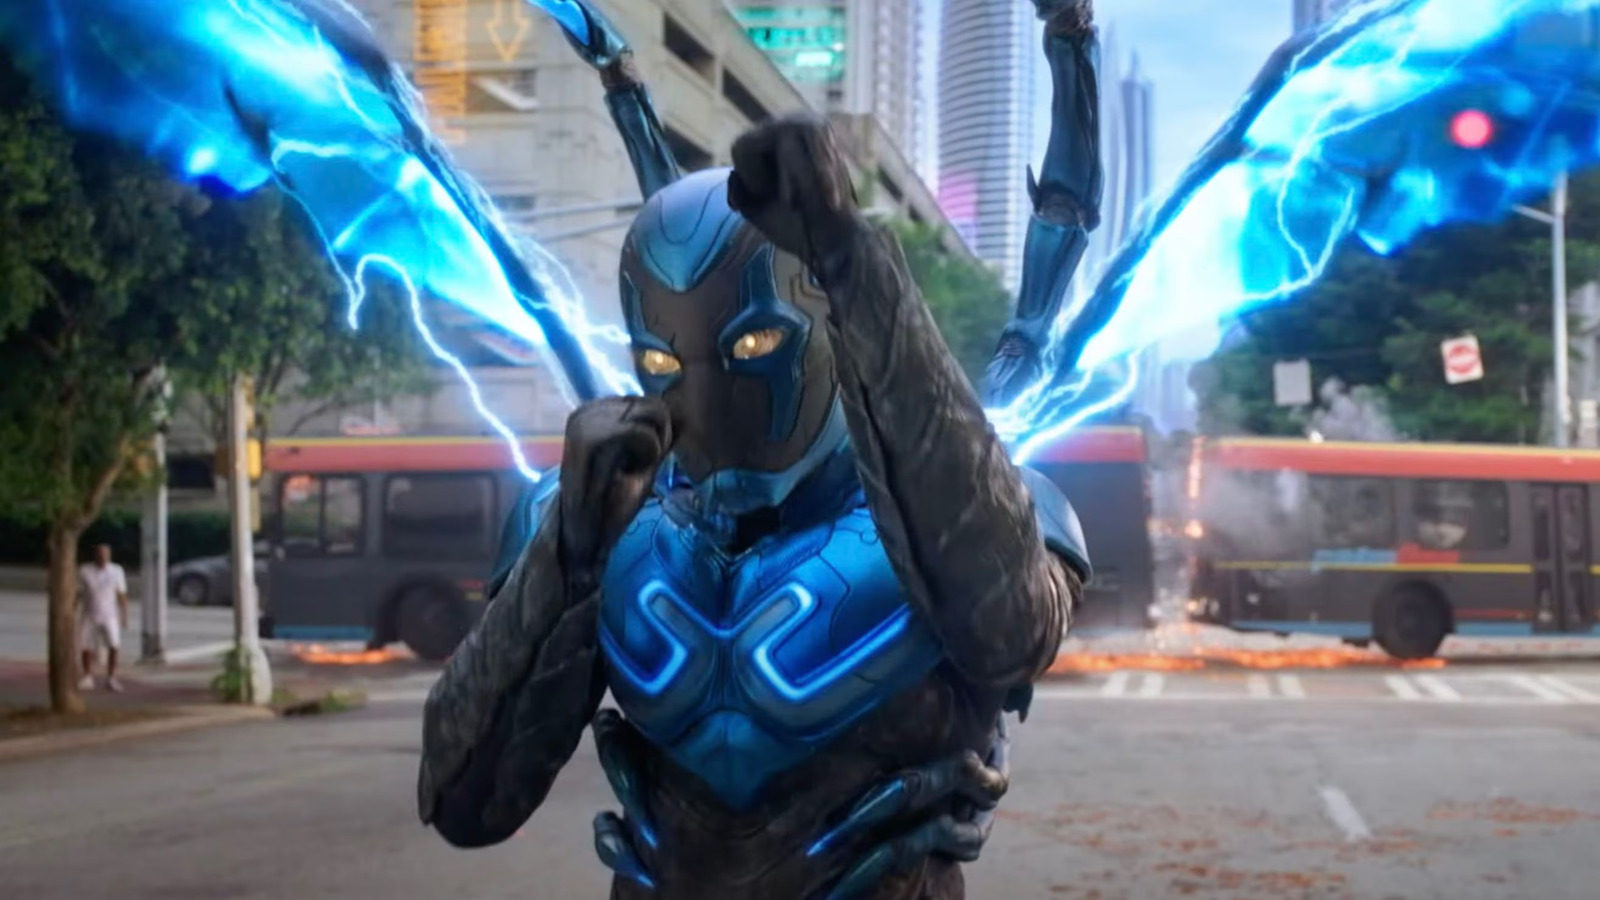 Repost from @Rotten Tomatoes: The first reviews are in for #BlueBeetle